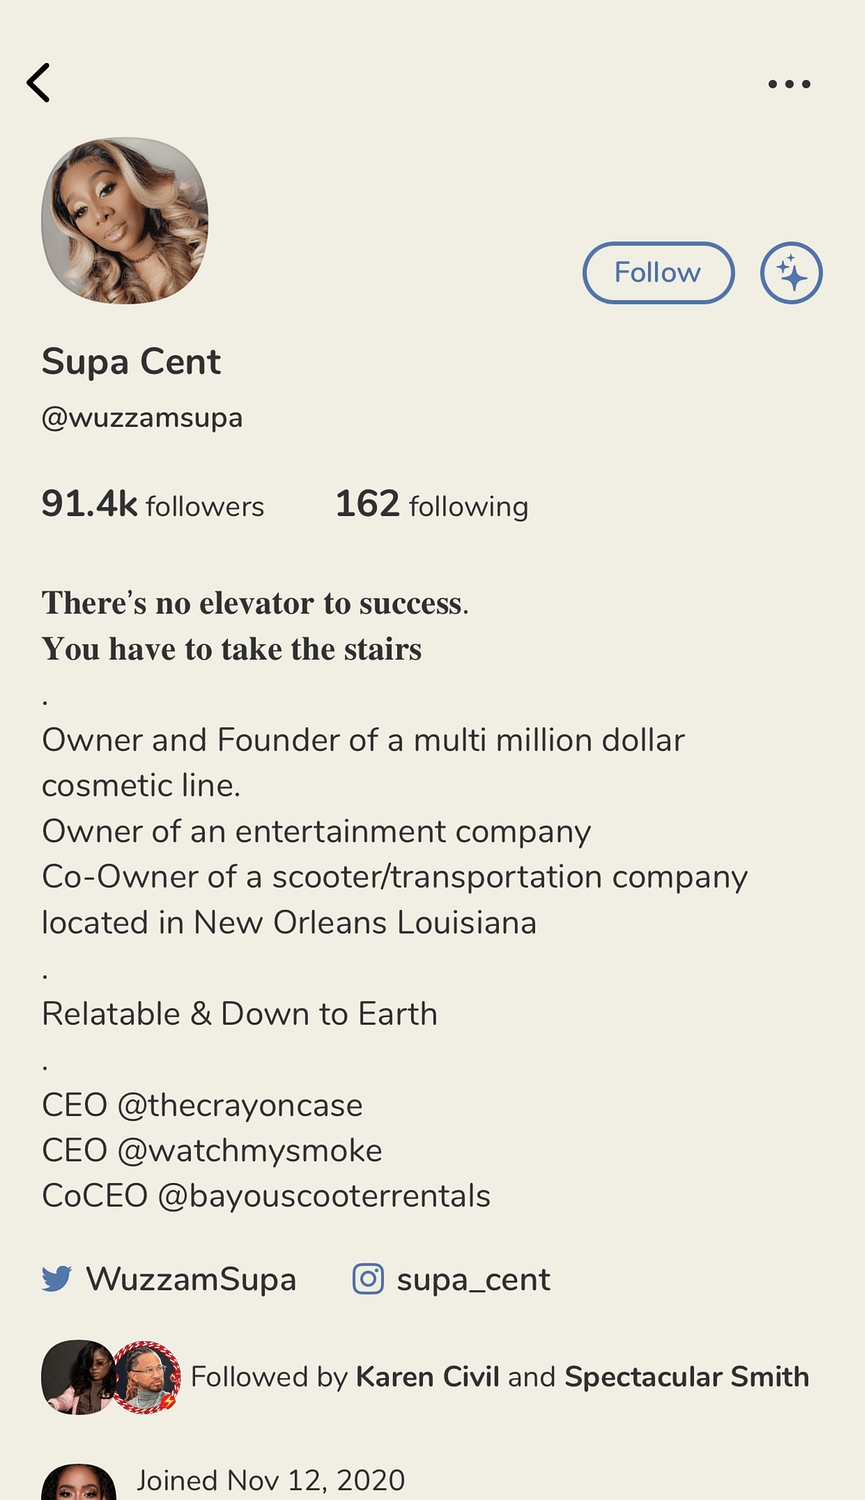 The profile for Supa Cent, an entrepreneur representing her brands and products.